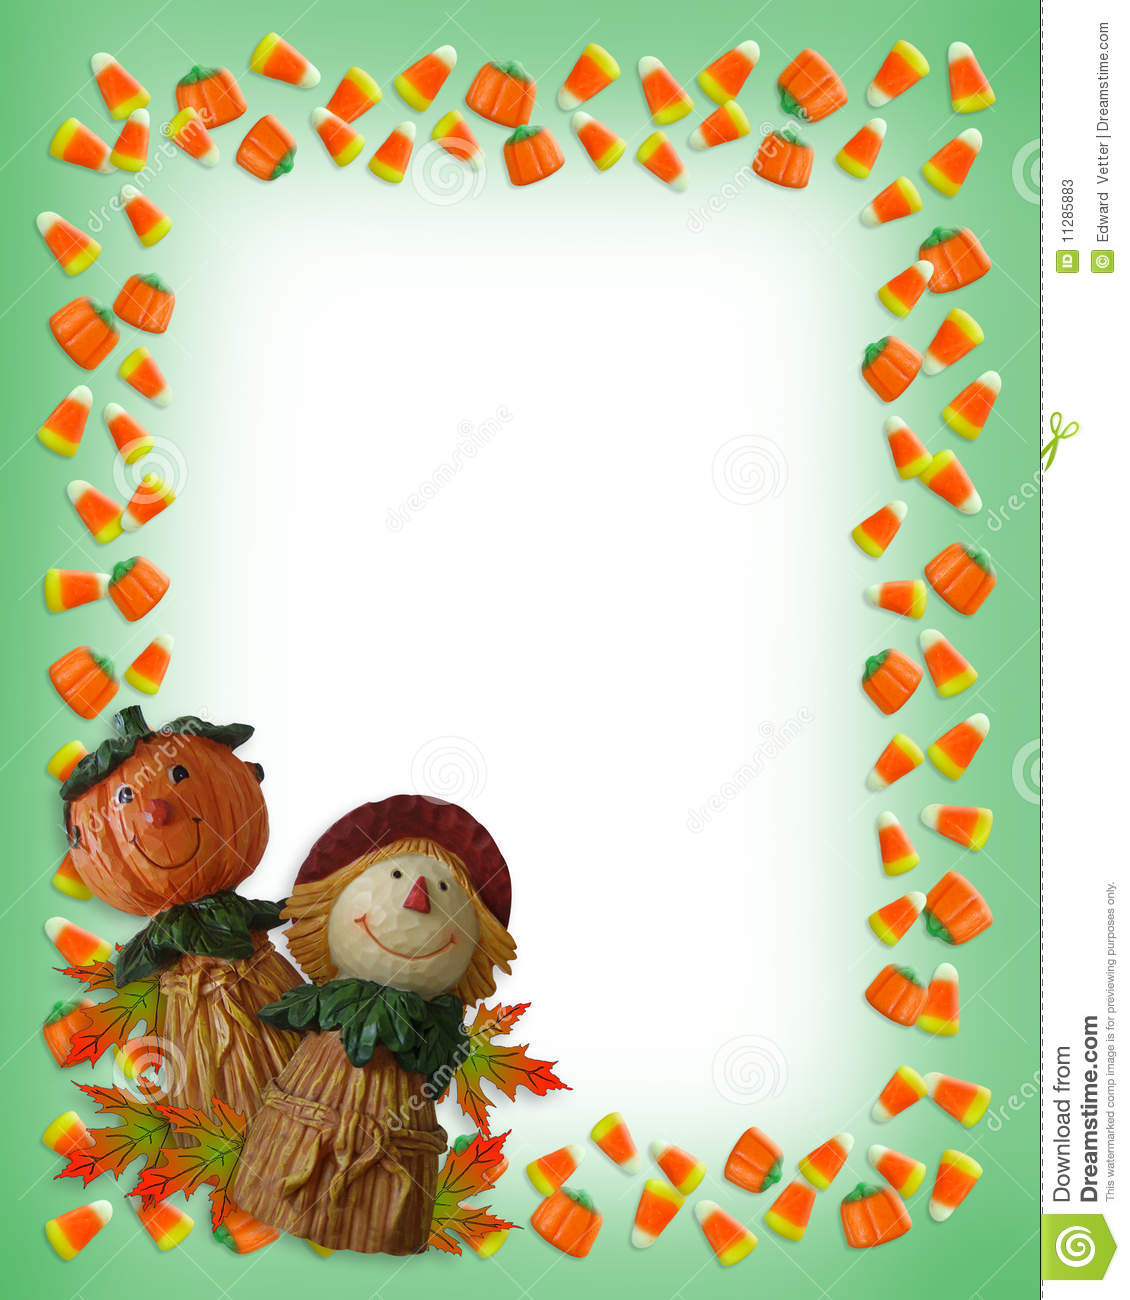 Image And Illustration Composition Halloween Border Fall Background